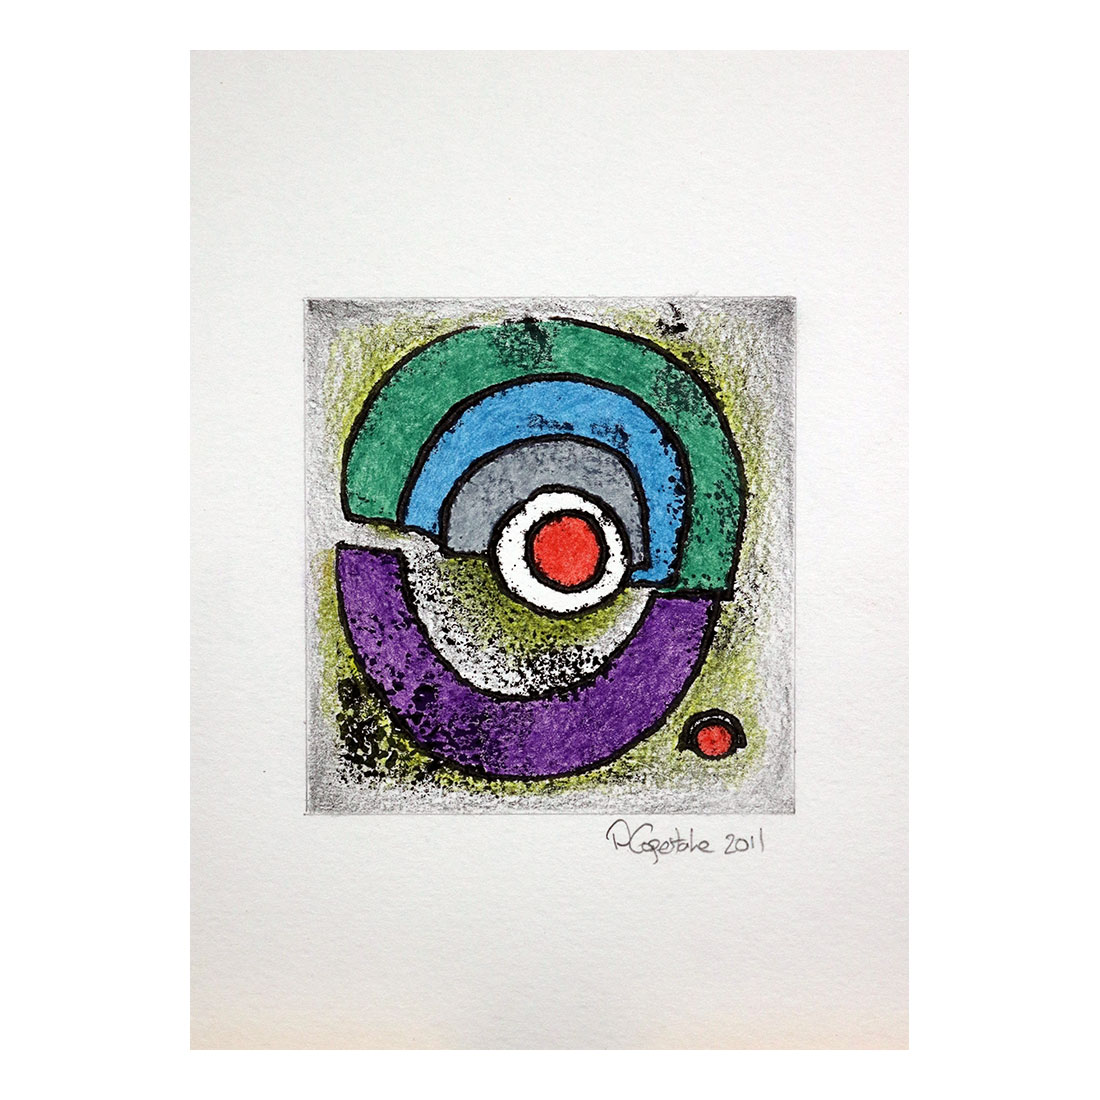 Concentric 2011 Giclée Print by Philip Copestake